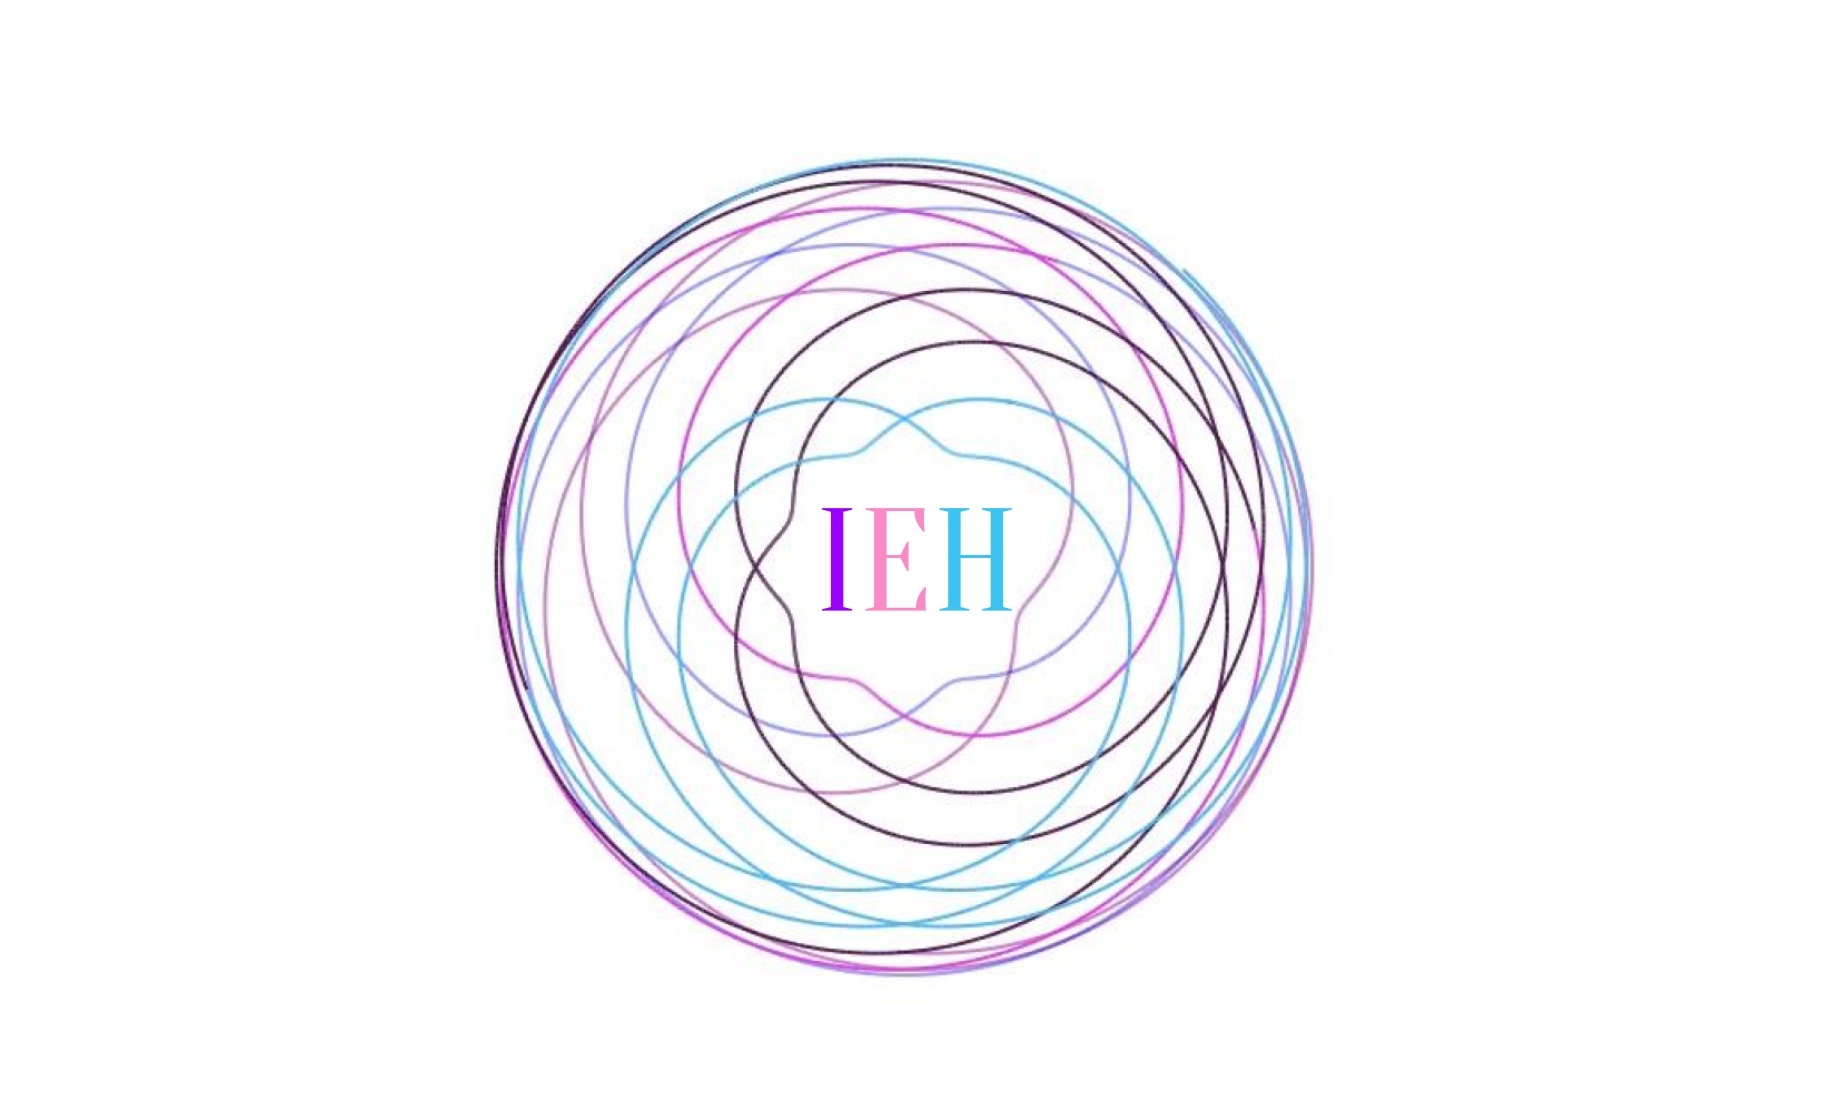 Sprirograph in MYFest colors (shades of blue, pink, and purple) with the letters IEH in the center